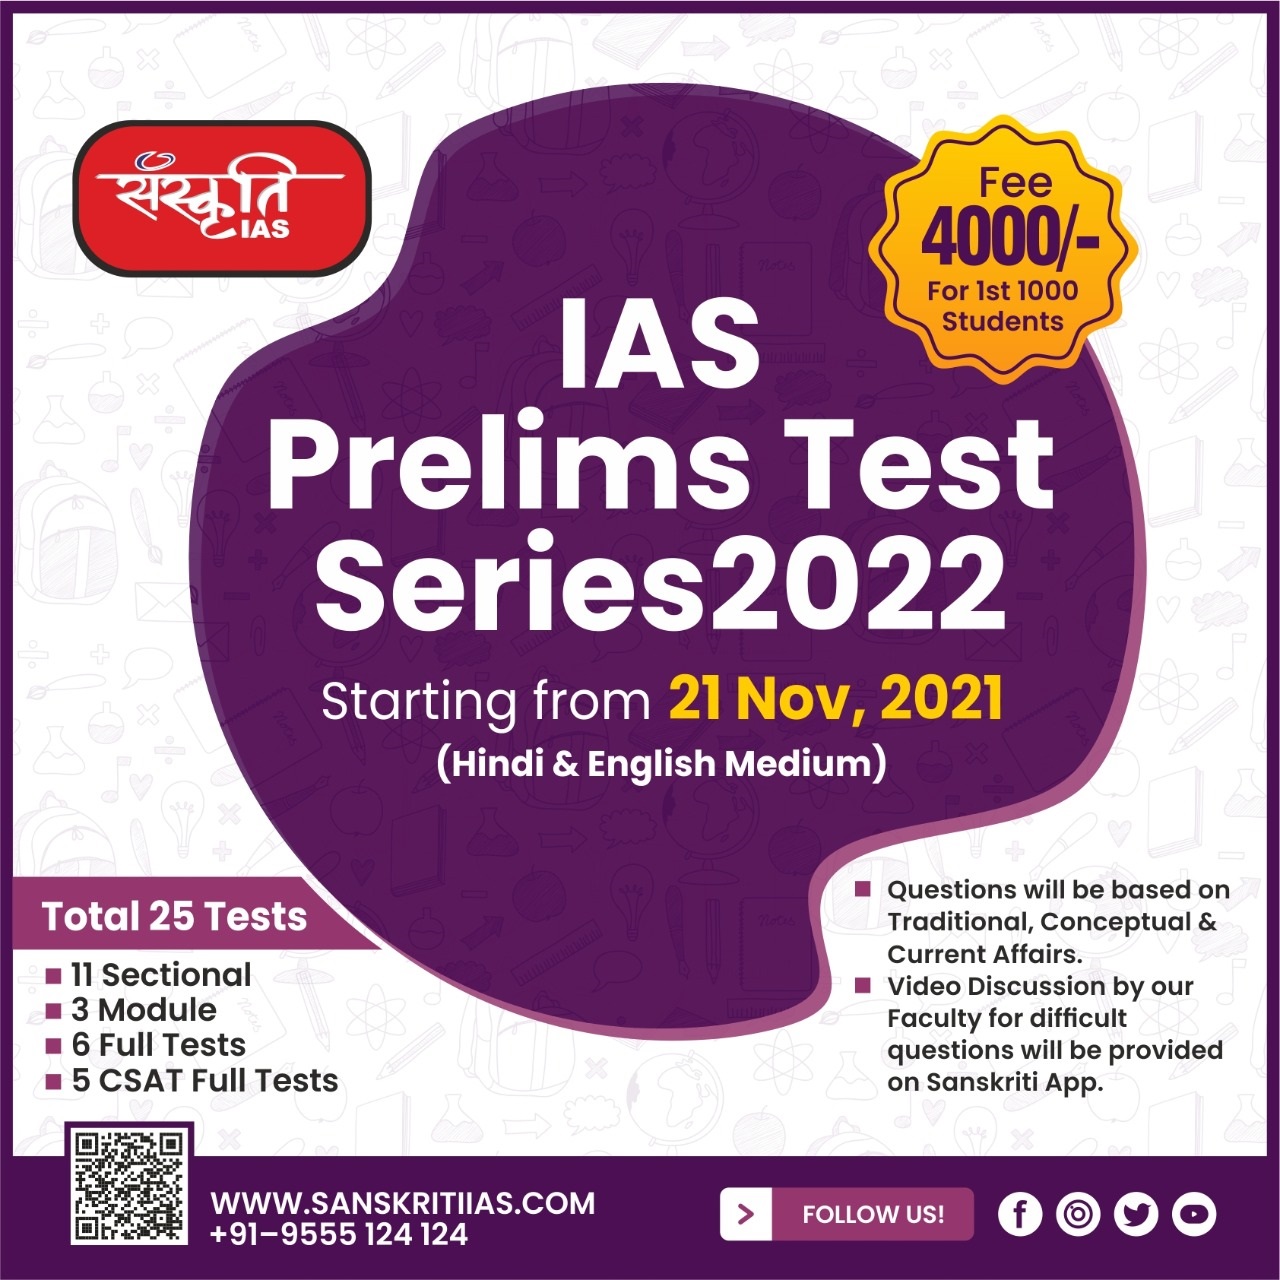 Sanskriti IAS Prelims Test Series 2022Education and LearningCoaching ClassesWest DelhiOther